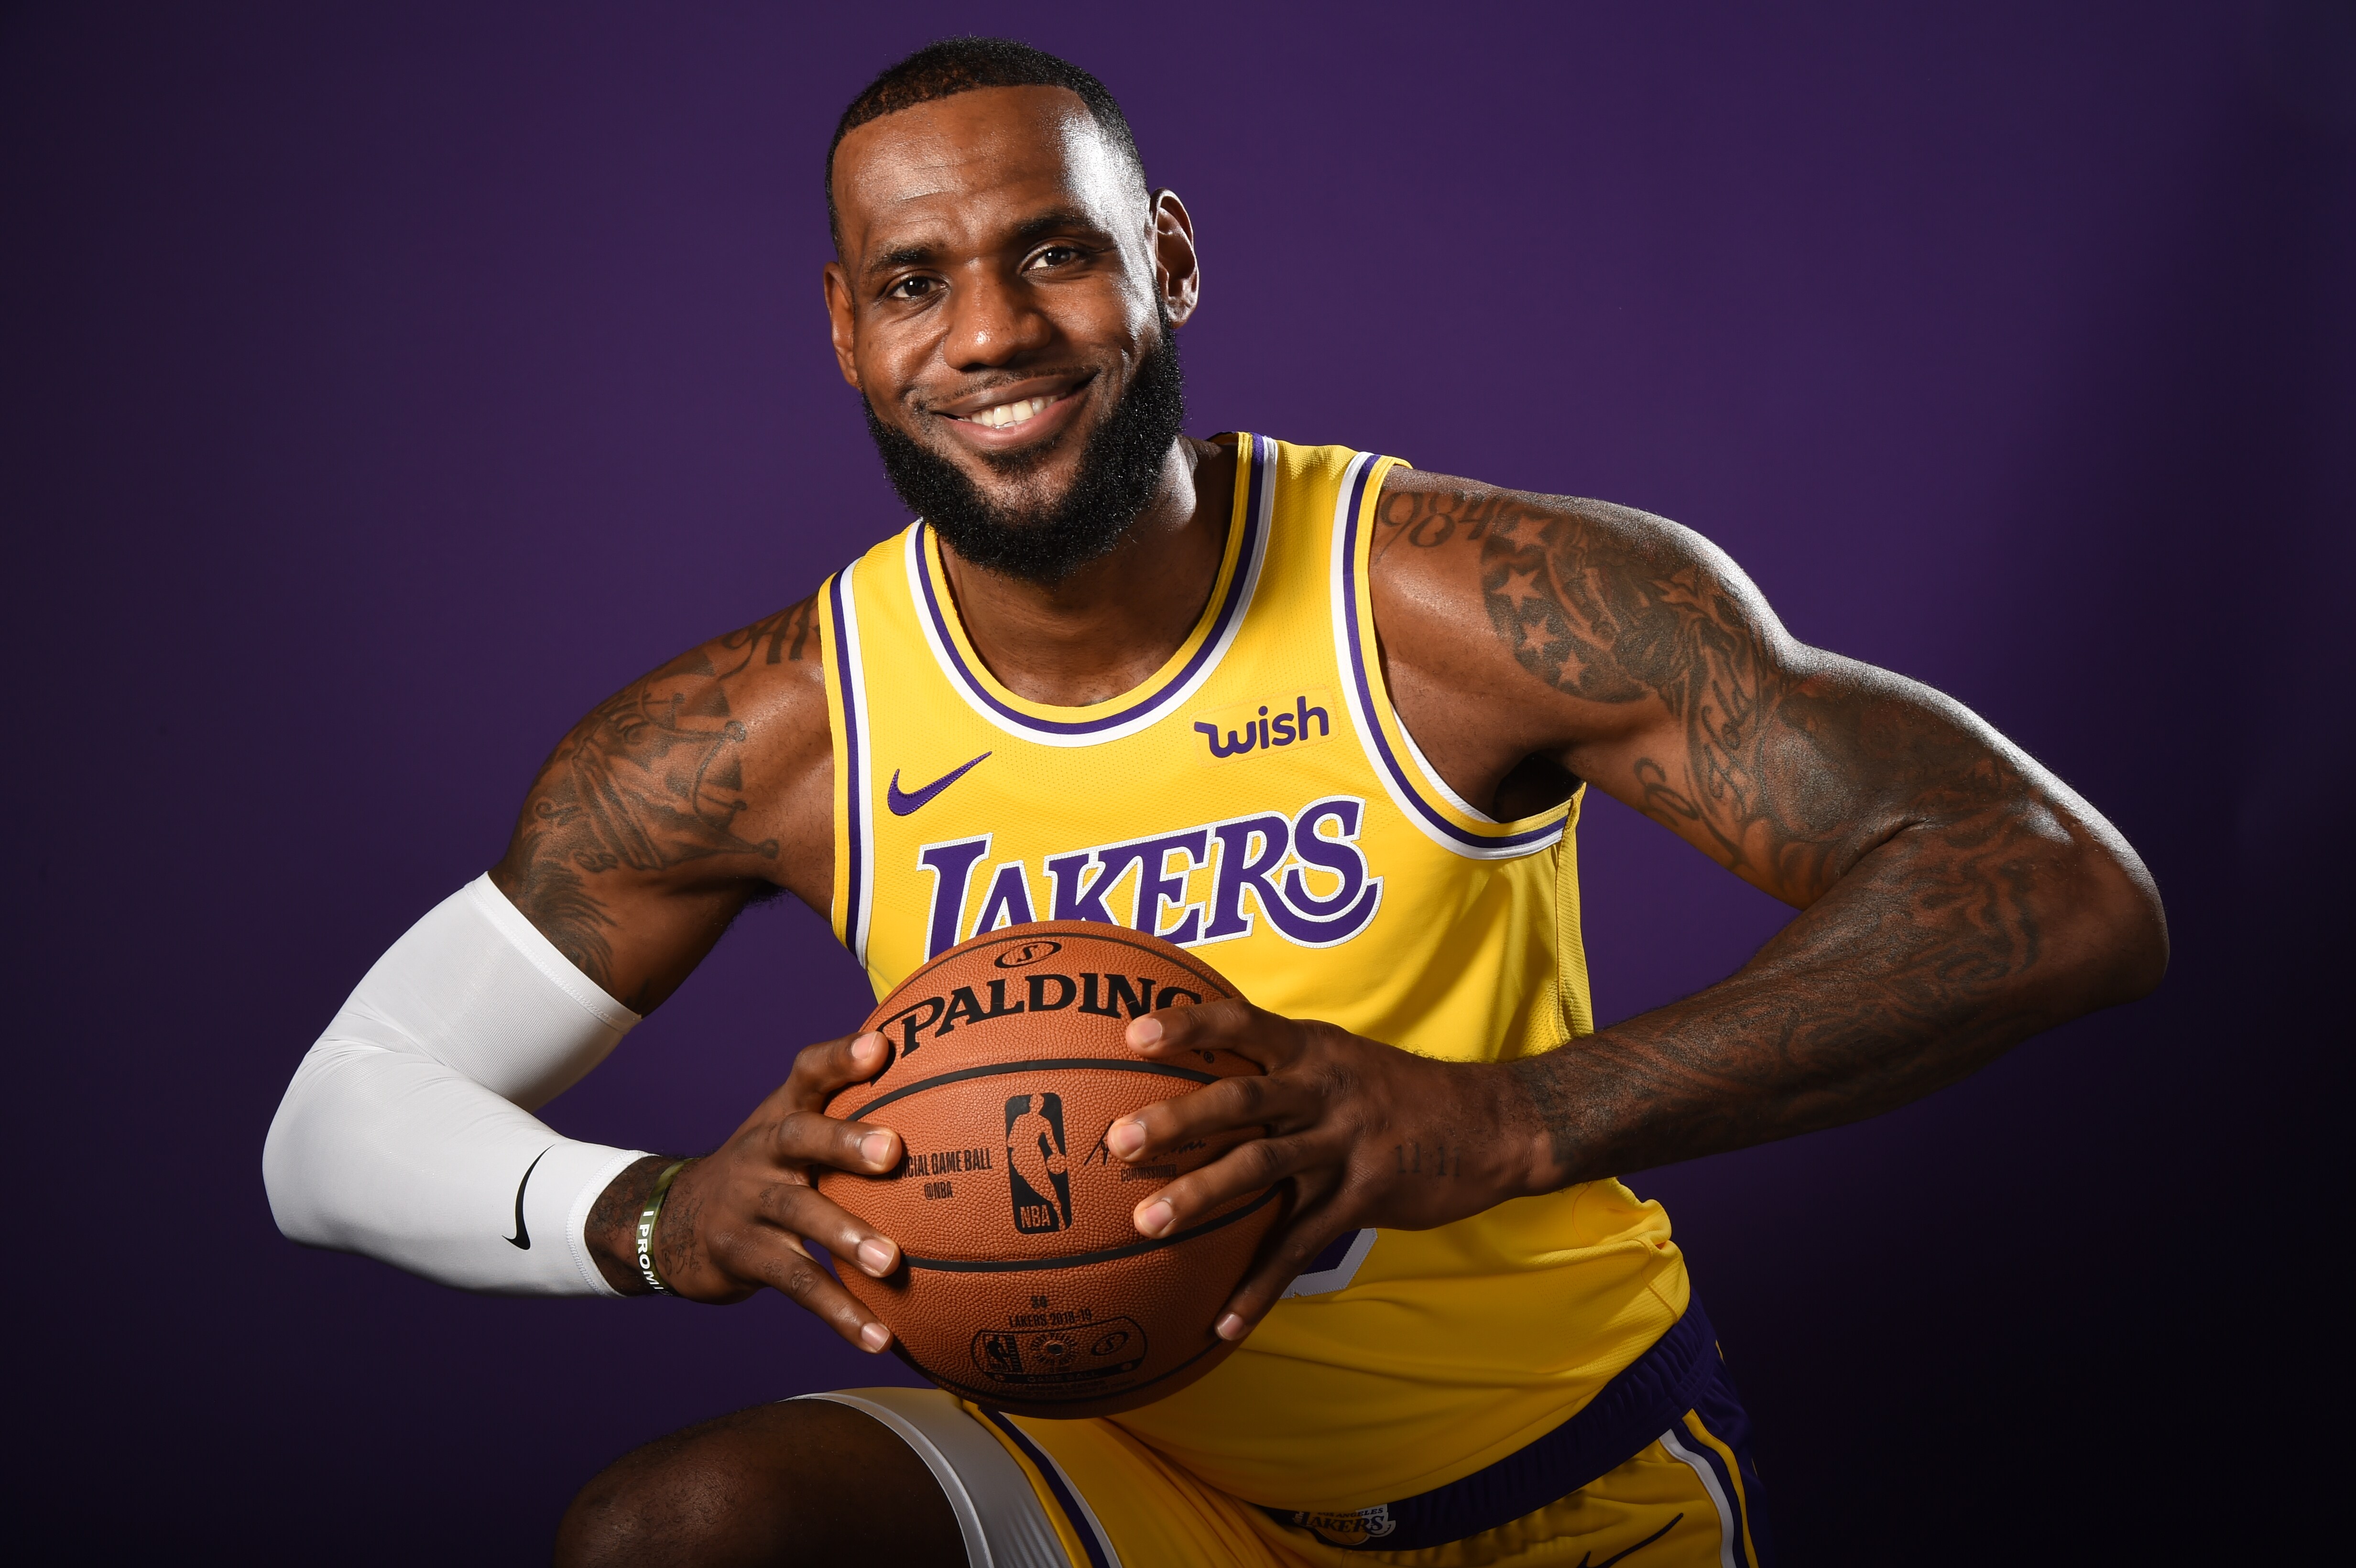 LeBron James 2020 Wallpaper,HD Sports Wallpapers,4k Wallpapers,Images